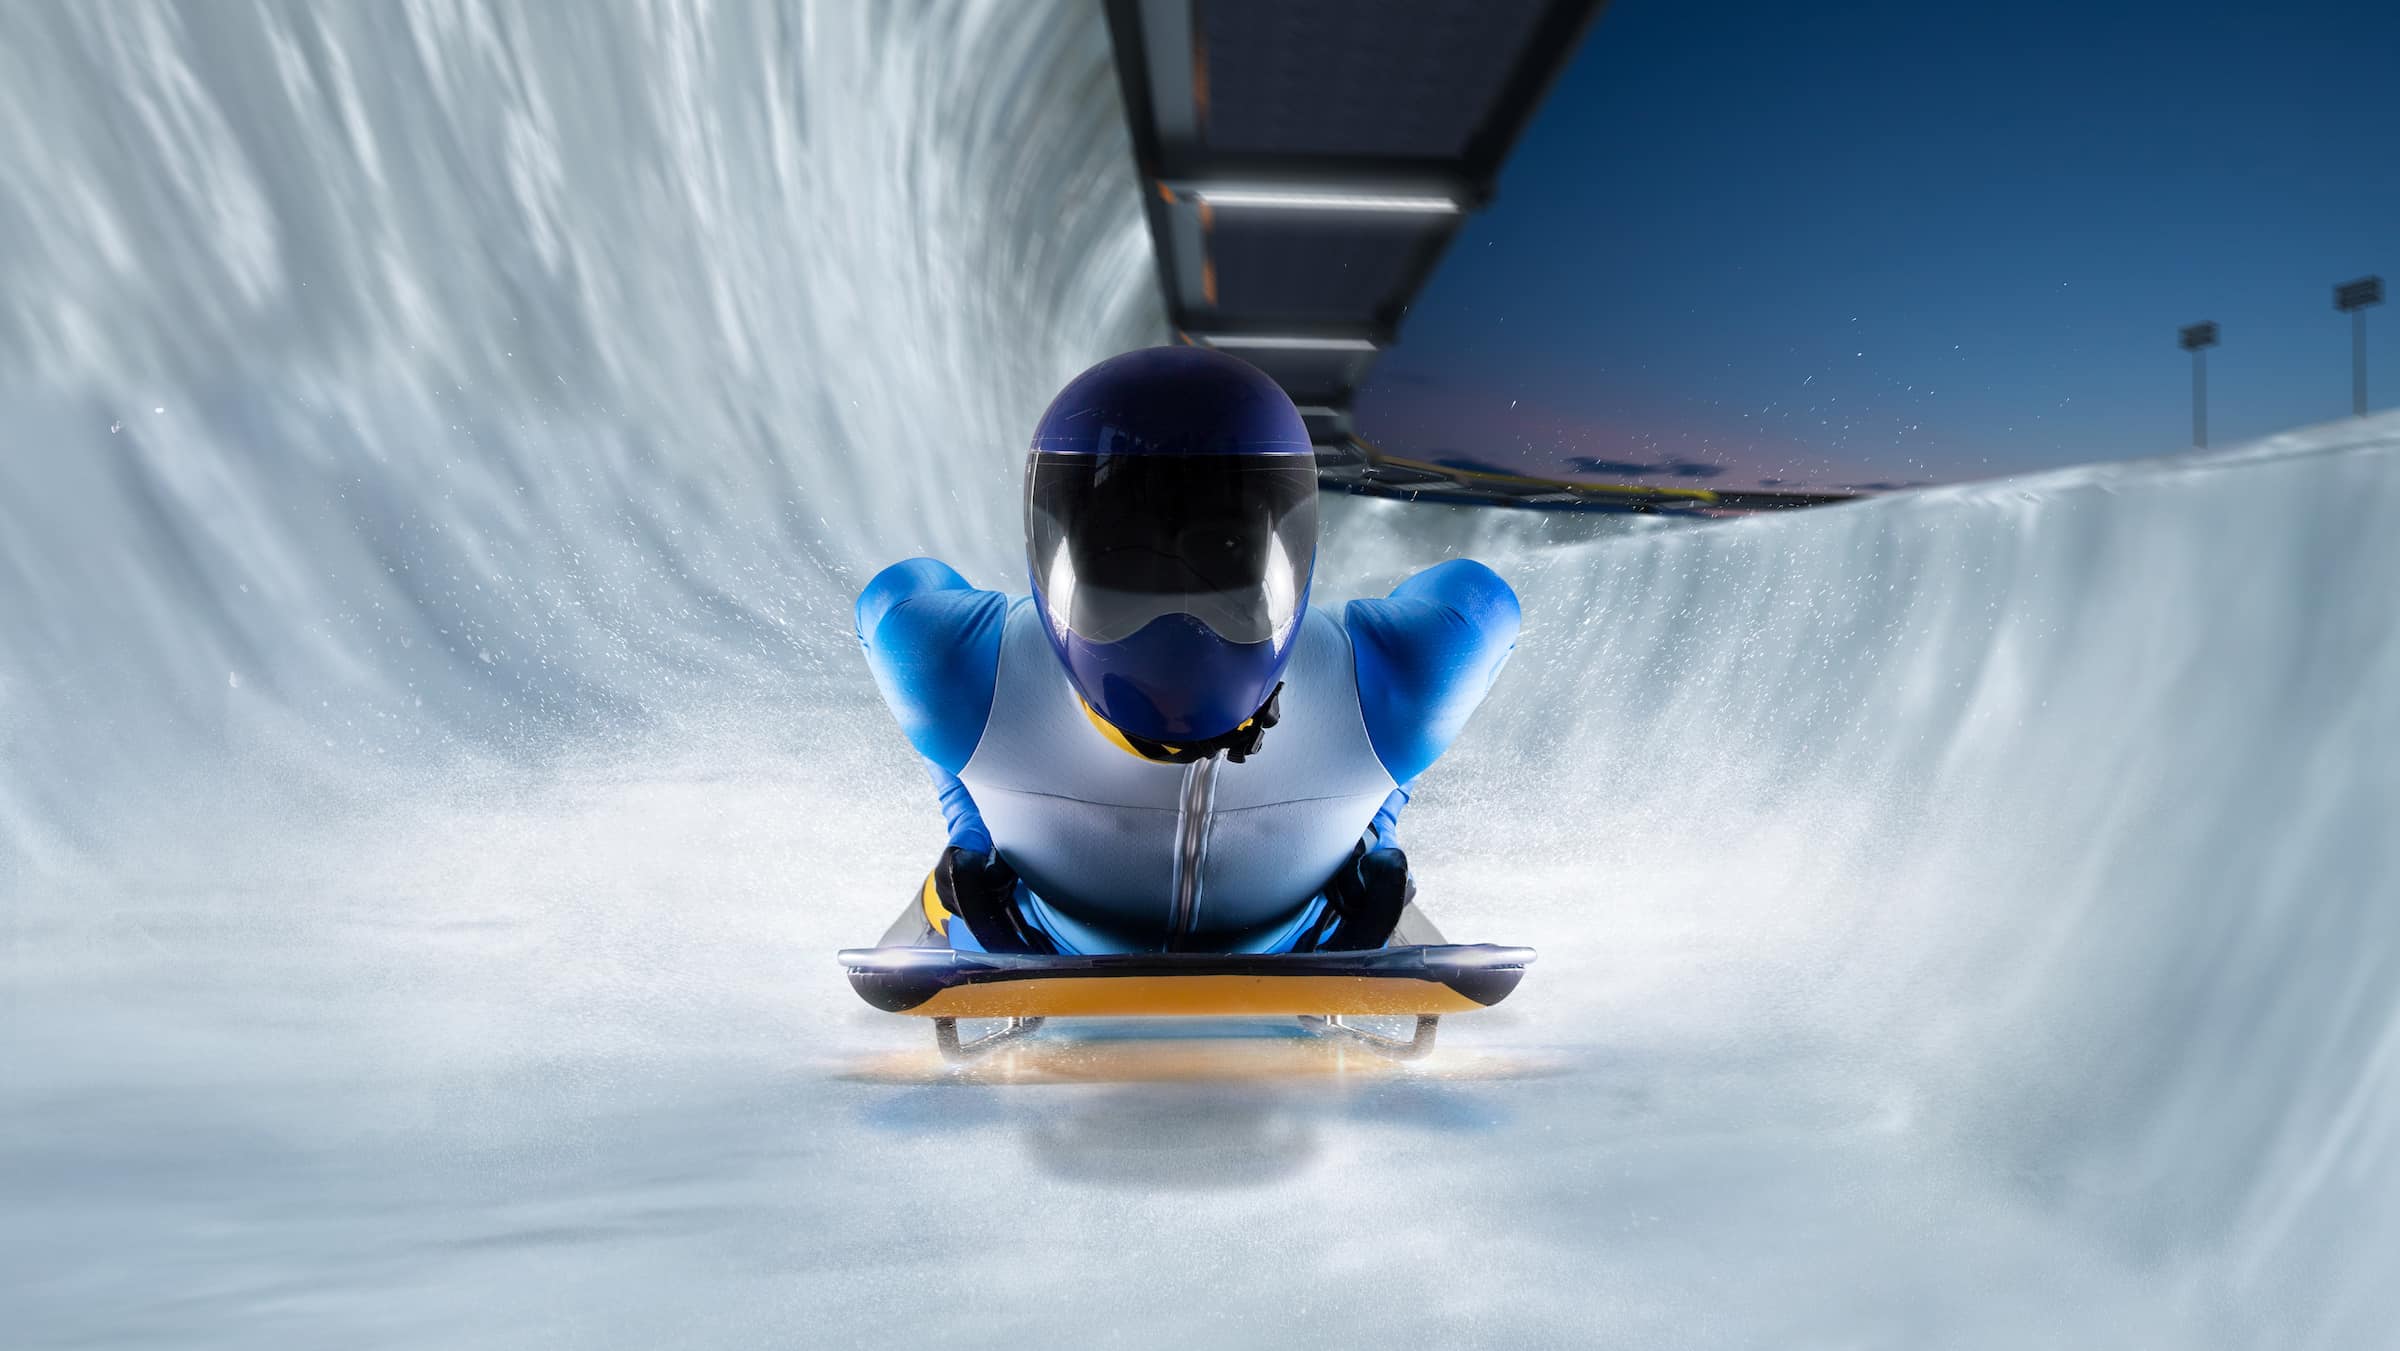 athlete descends on a sleigh on an ice track